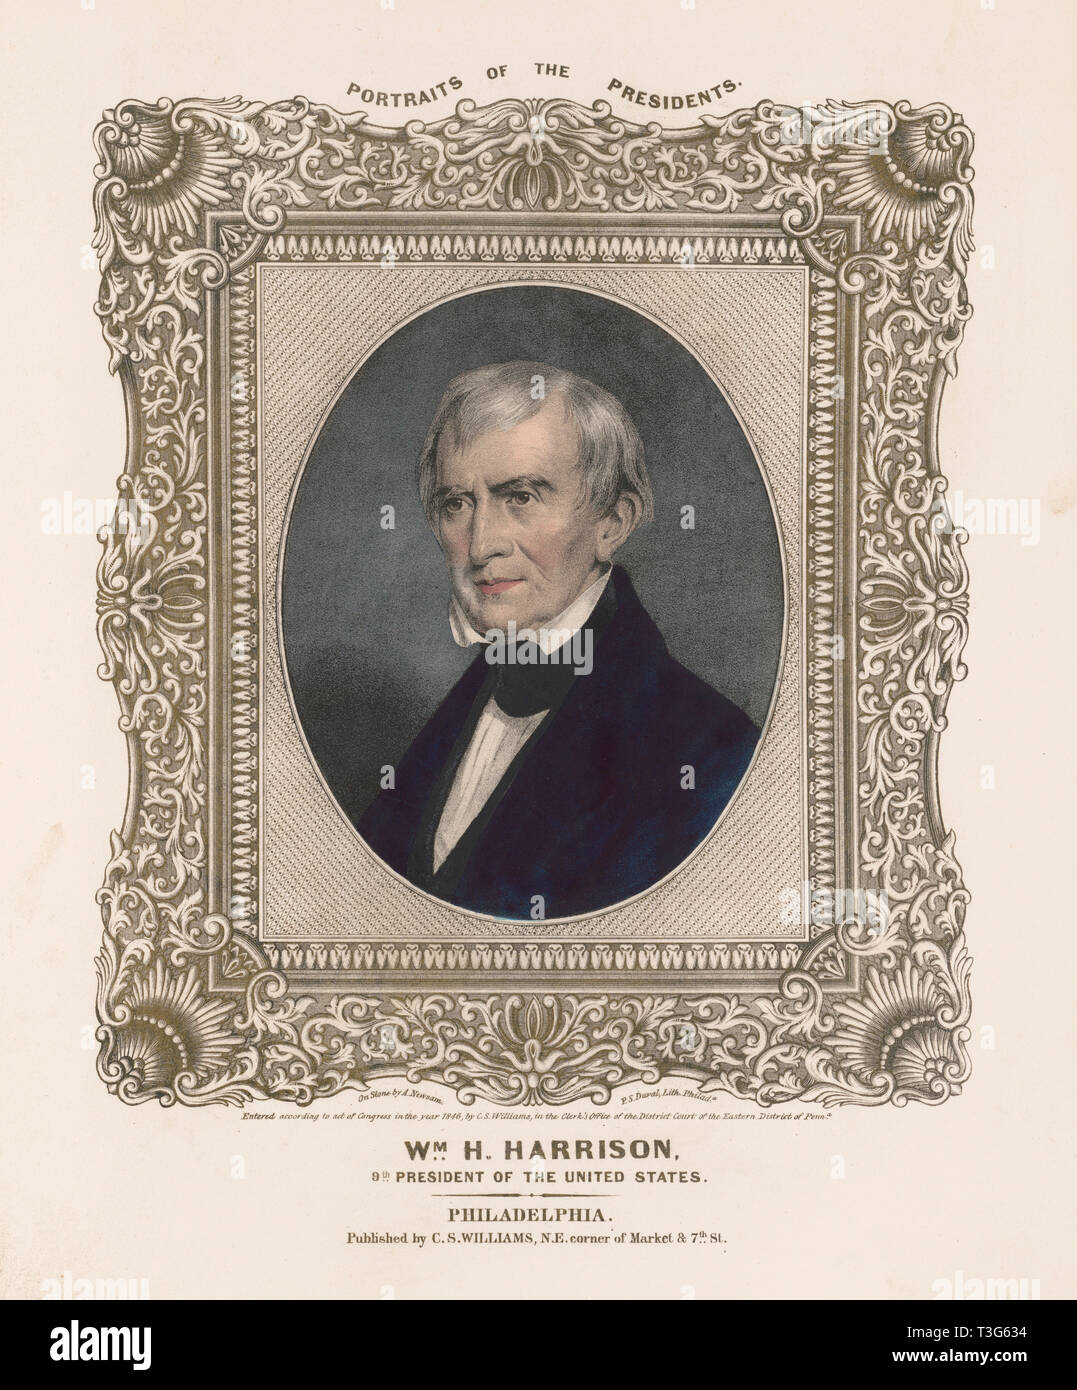 William Henry Harrison, 9th President of the United States, Life on Stone by A. Newsam, Lithograph by A. Duval, Published by C.S. Williams, Philadelphia, 1846 Stock Photo